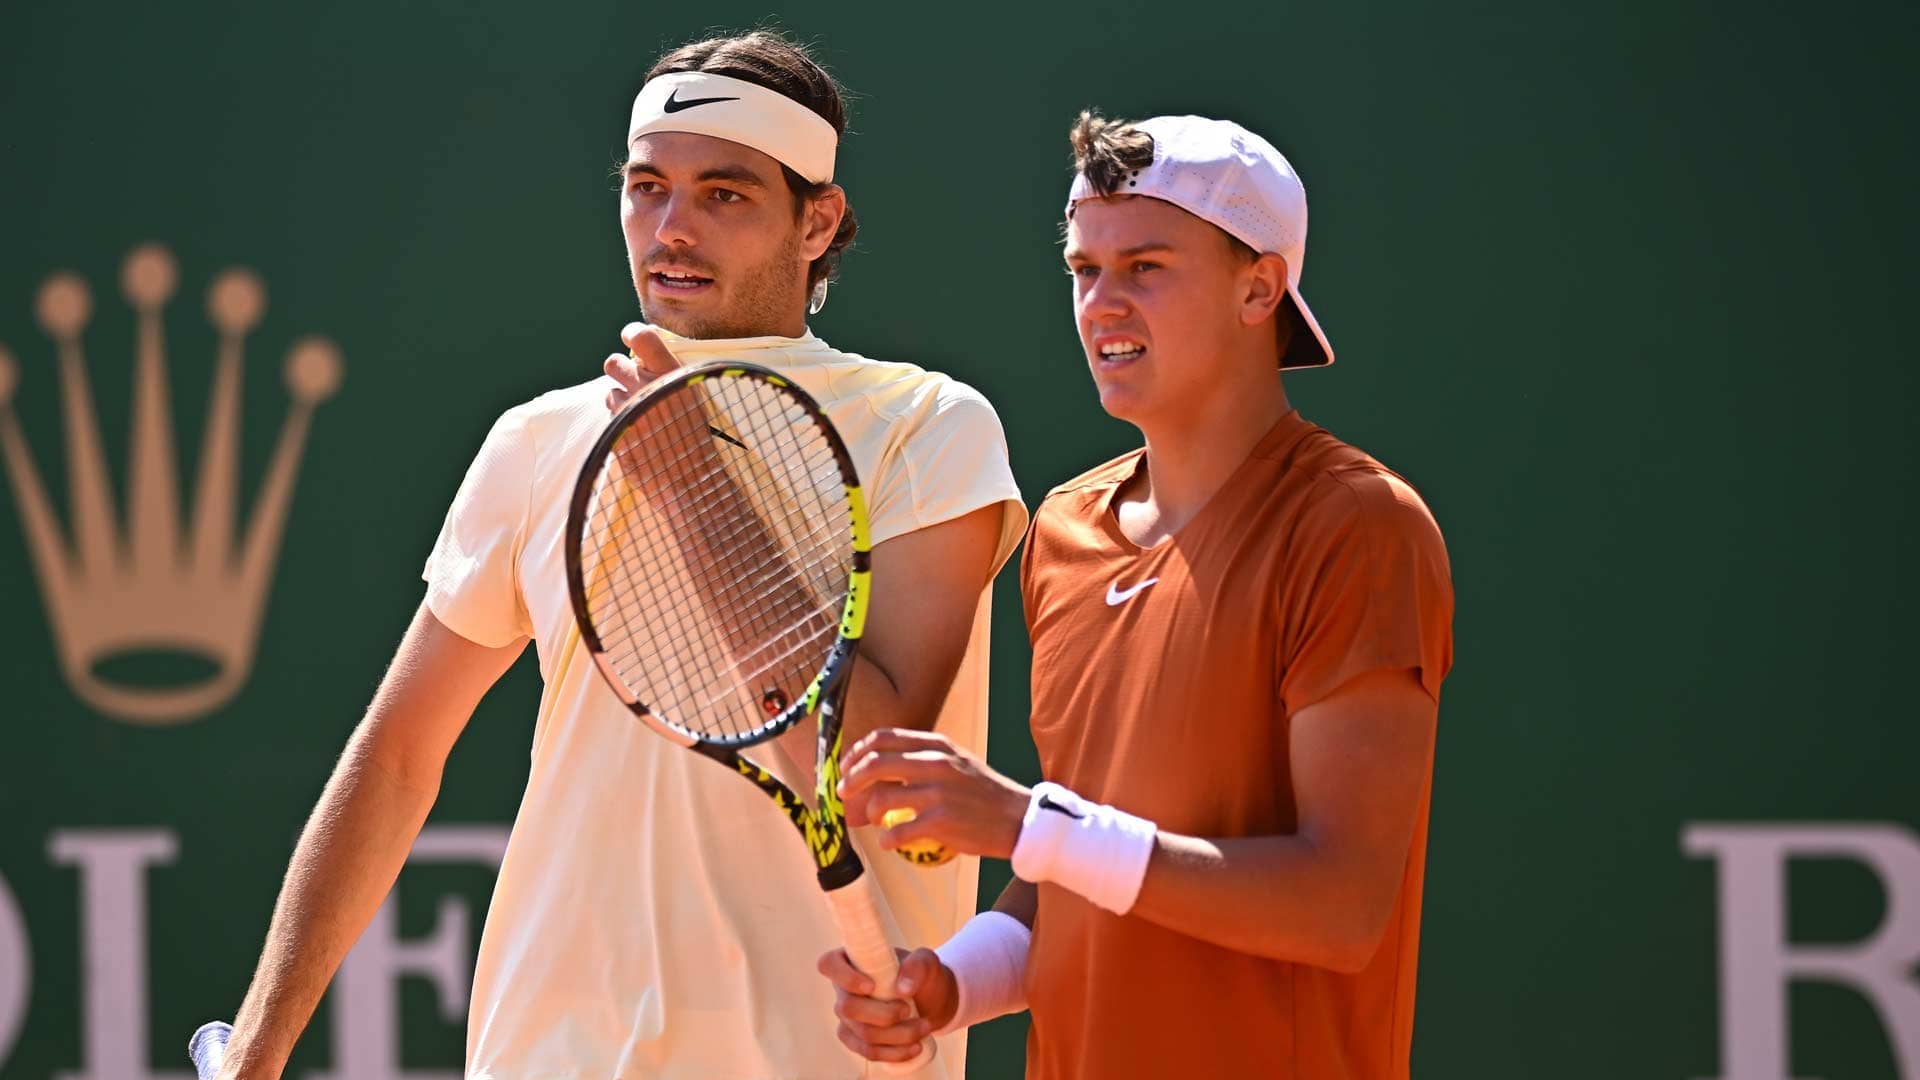 Taylor Fritz and Holger Rune improve to 2-0 as a pair.